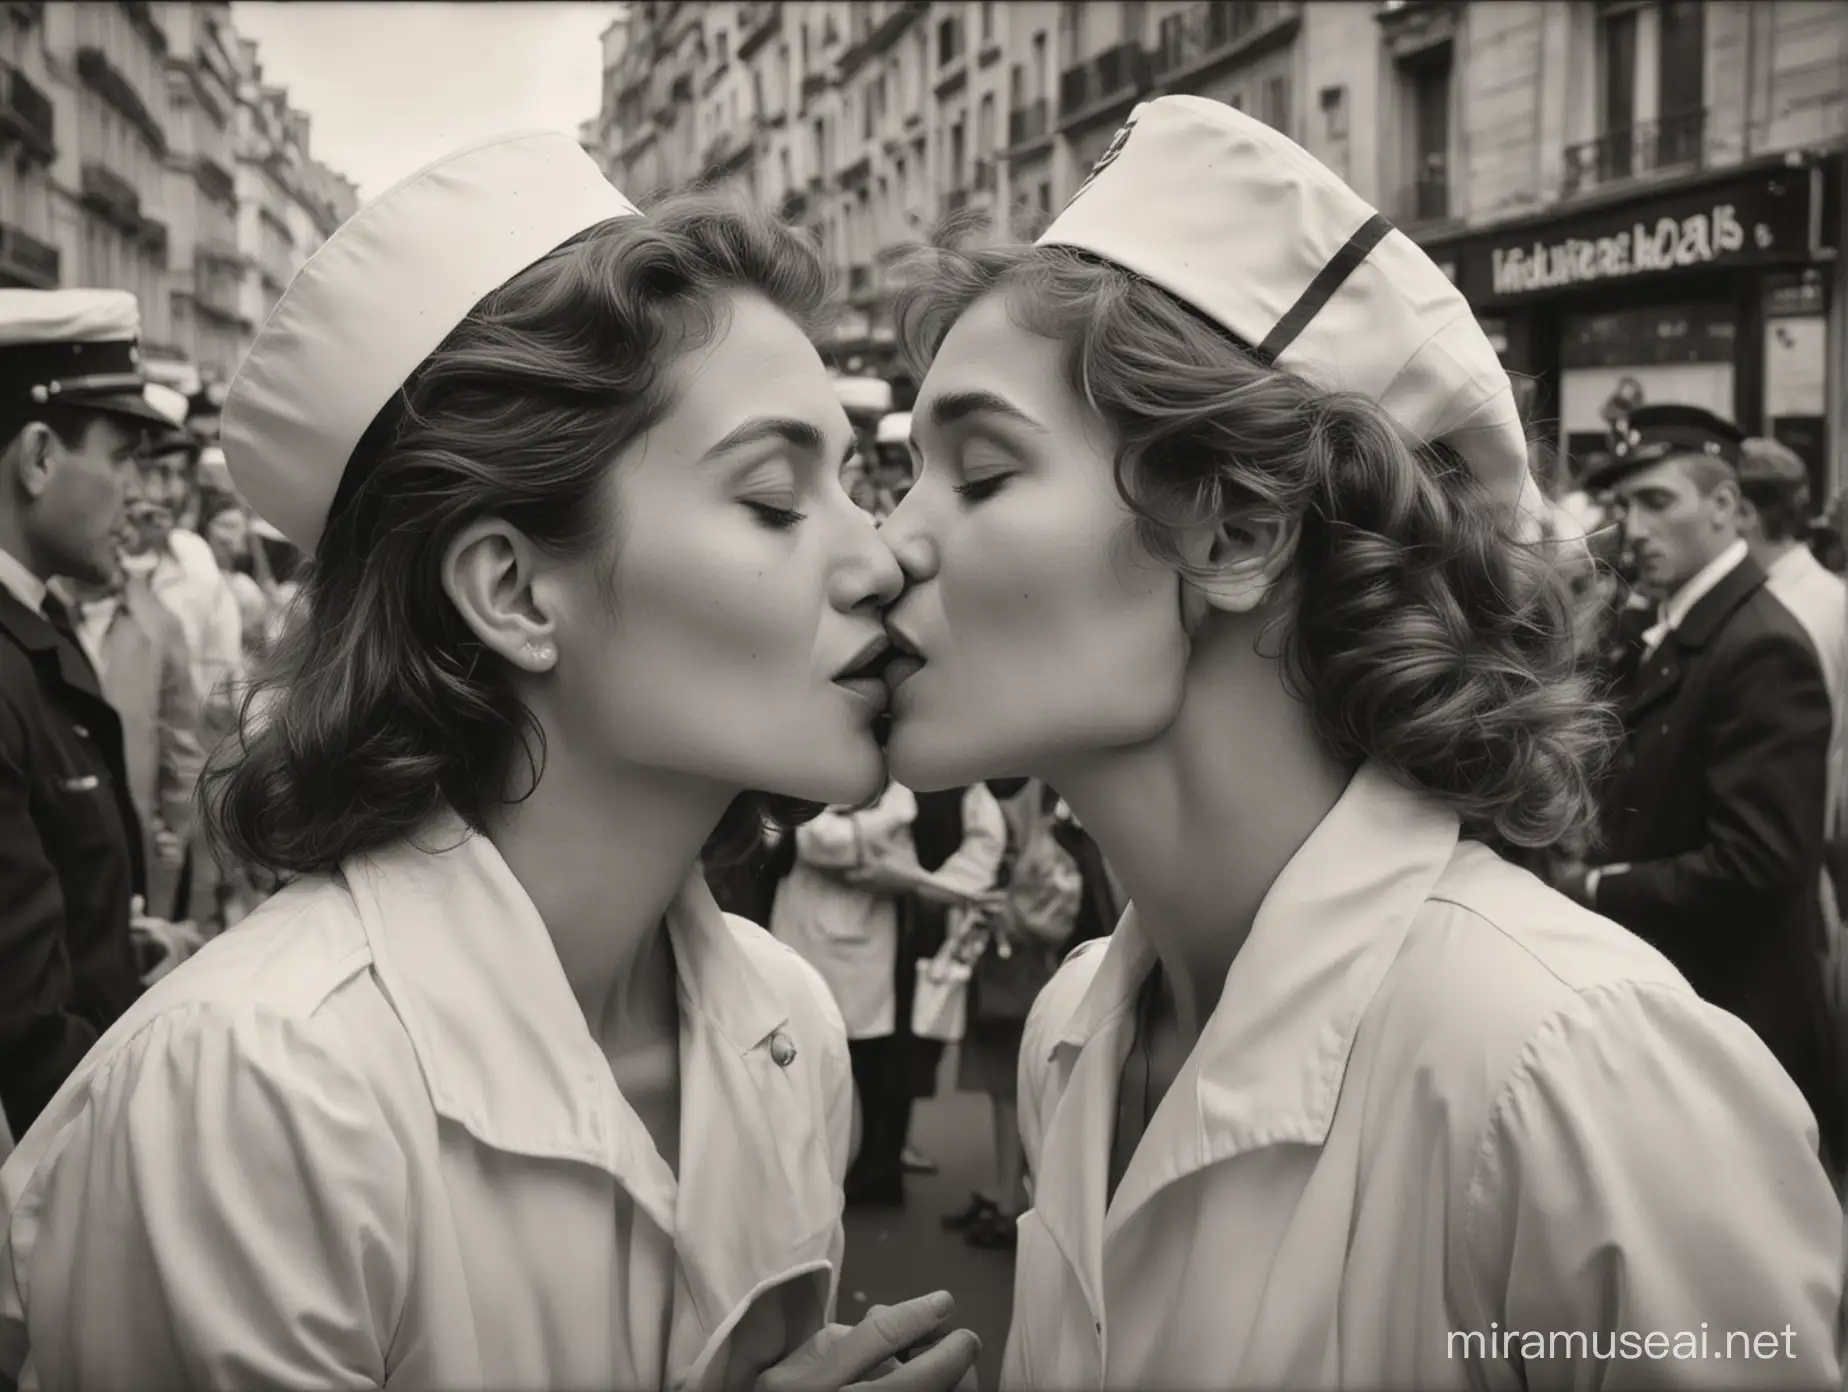 Iconic World War II Victory Kiss Amidst Celebrations in Paris